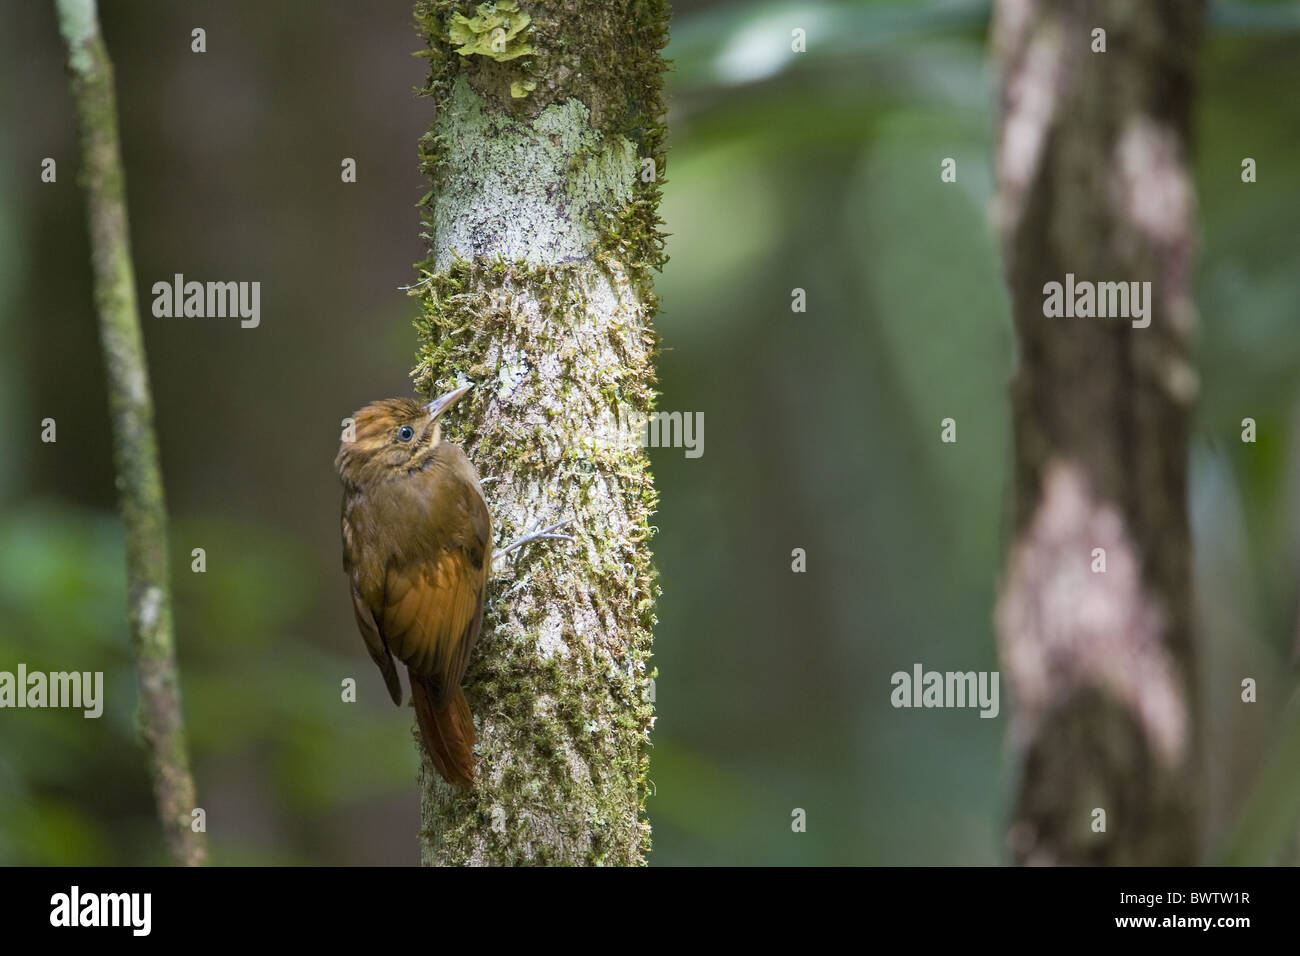 Tawny-winged woodcreeper (Dendrocincla anabatina) adult, clinging to tree trunk in forest, Belize Stock Photo